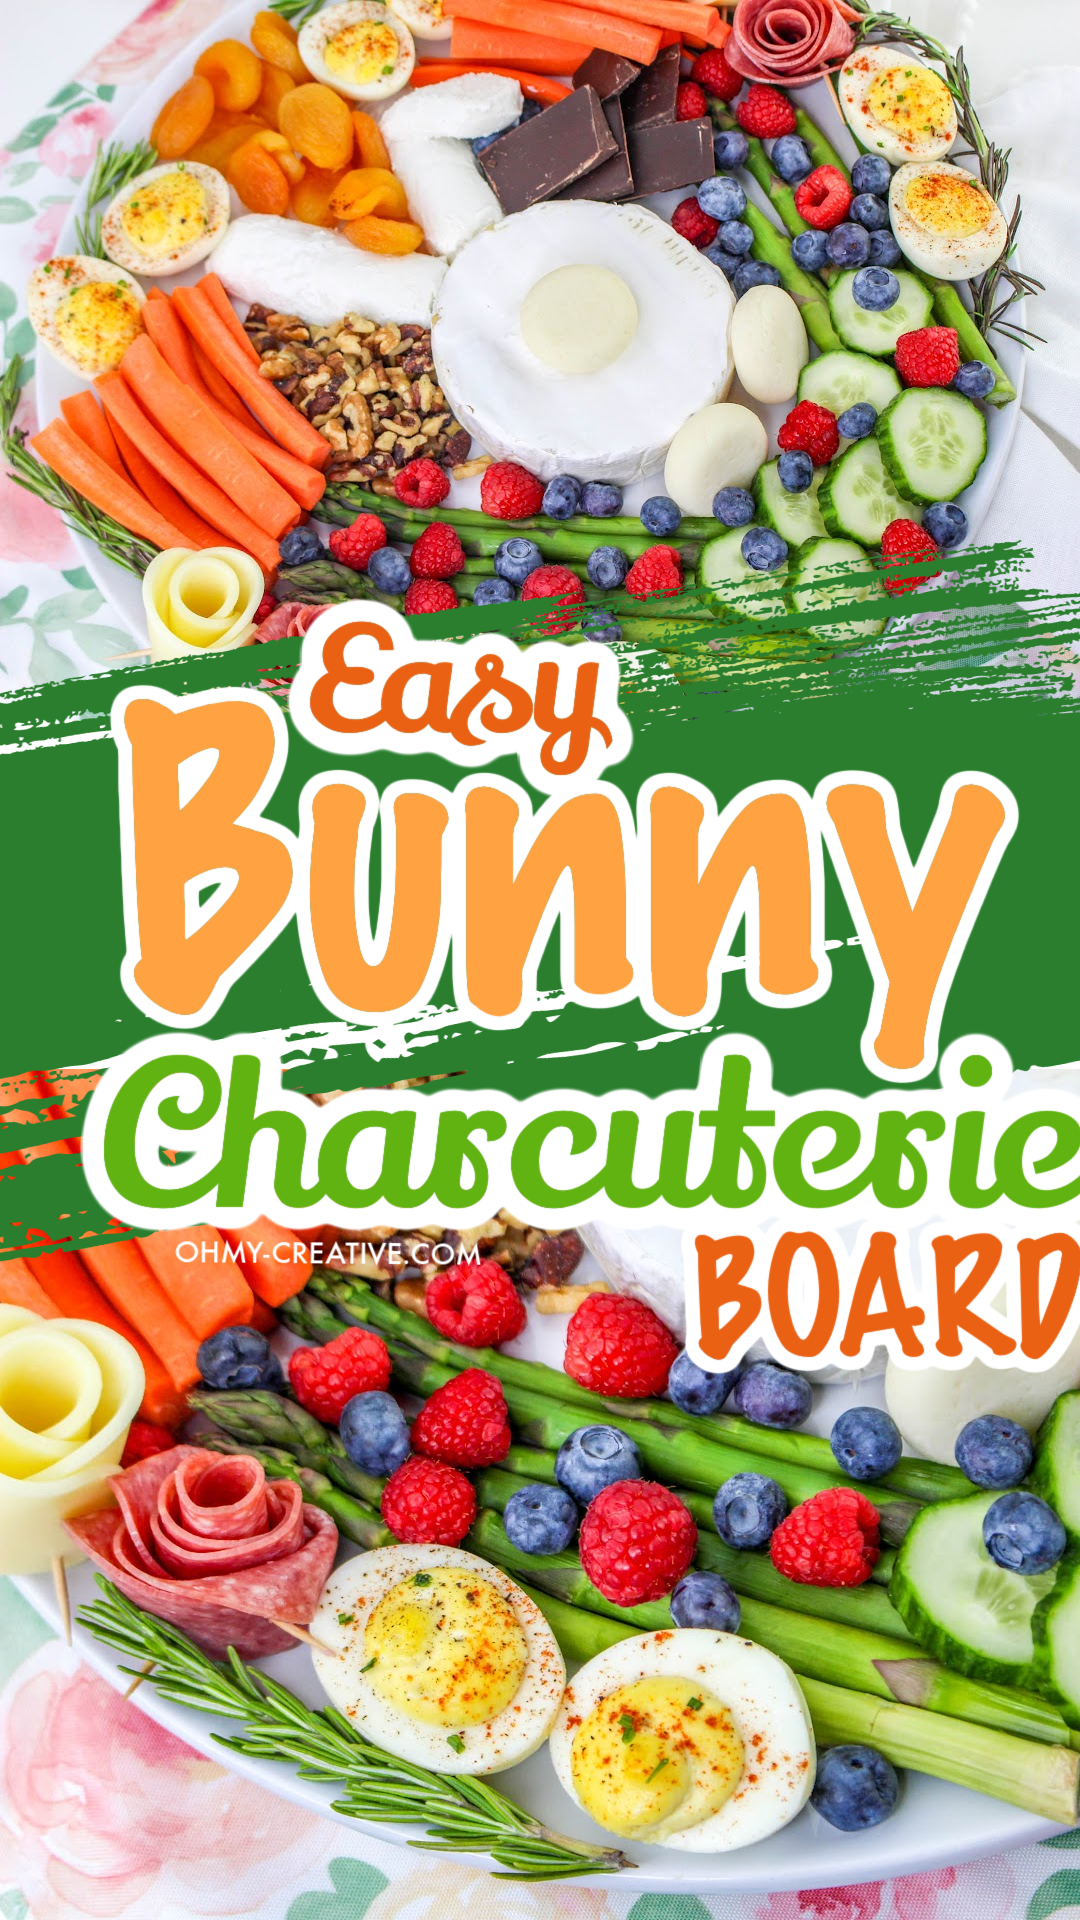 A two image pin image for bunny made of cheese in the center of a fruit and vegetable charcuterie board.